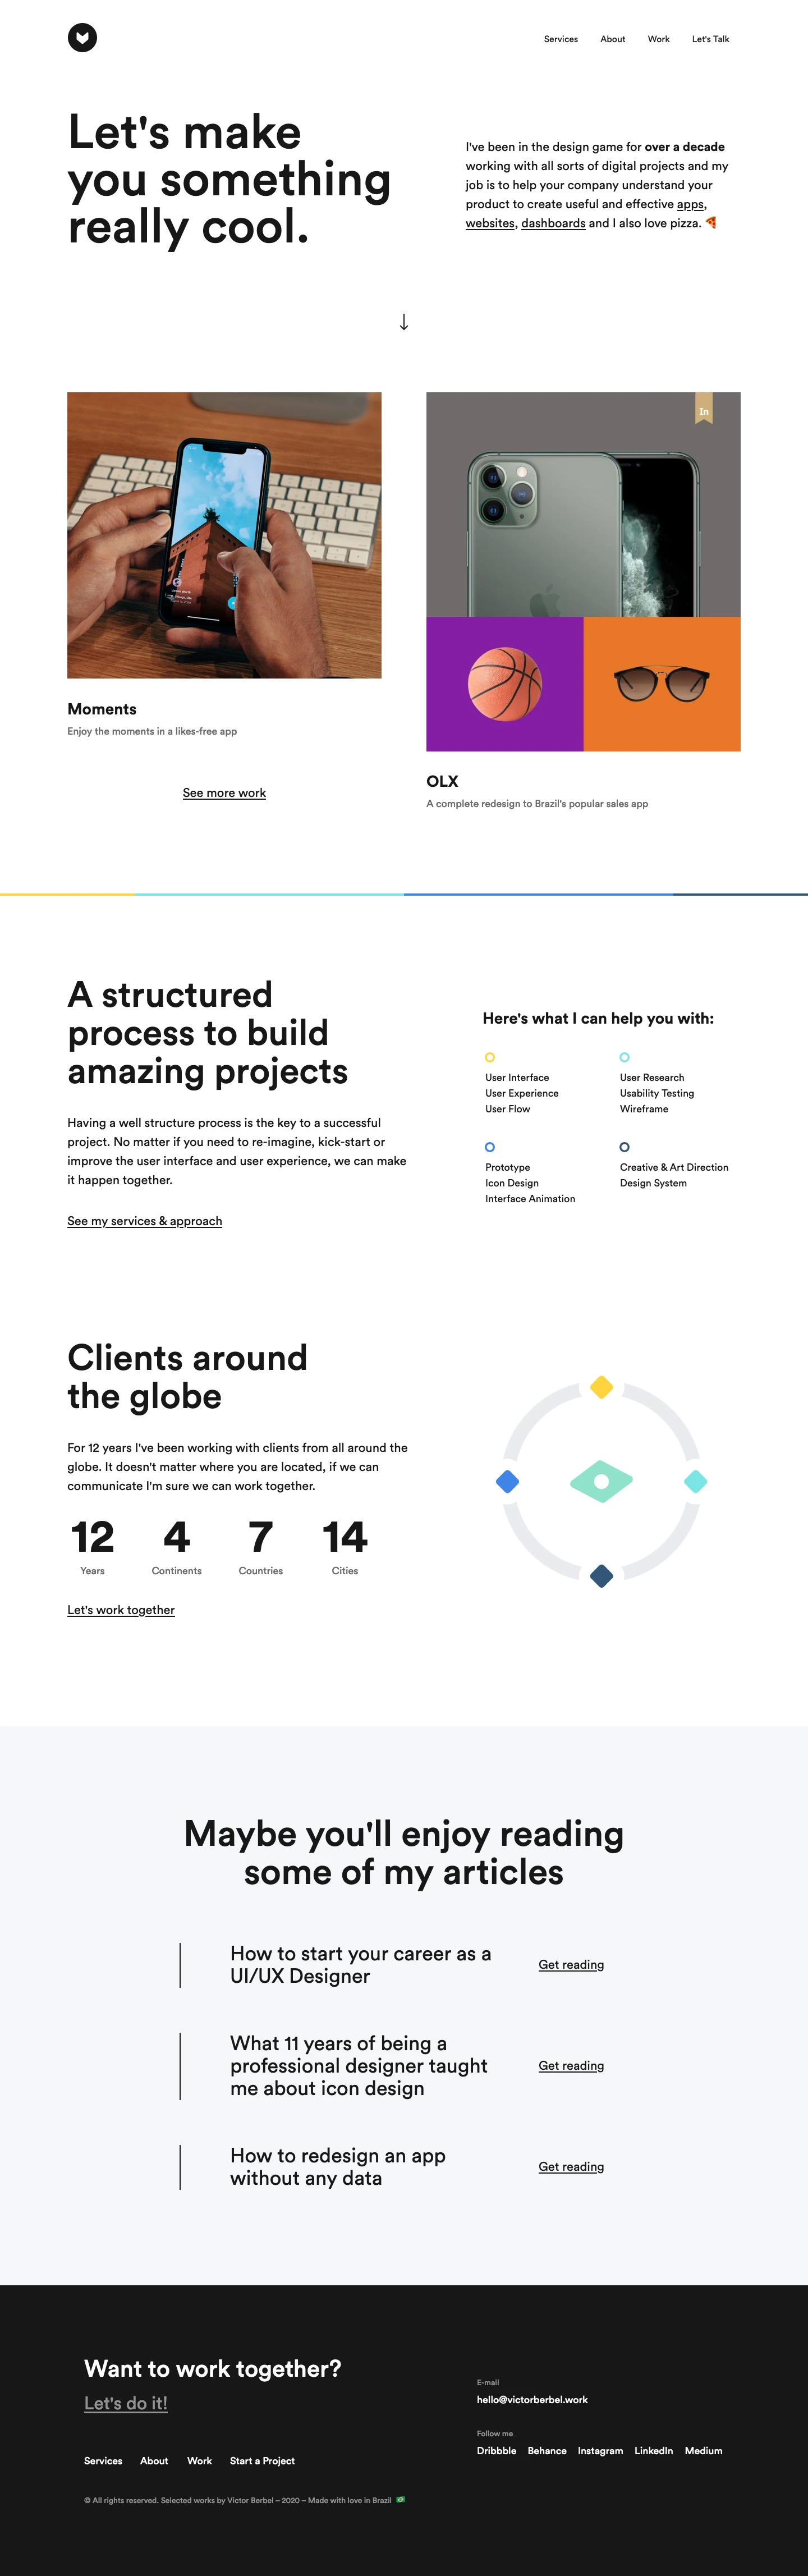 Victor Berbel Landing Page Example: I've been in the design game for over a decade working with all sorts of digital projects and my job is to help your company understand your product to create useful and effective apps, websites, dashboards and I also love pizza.